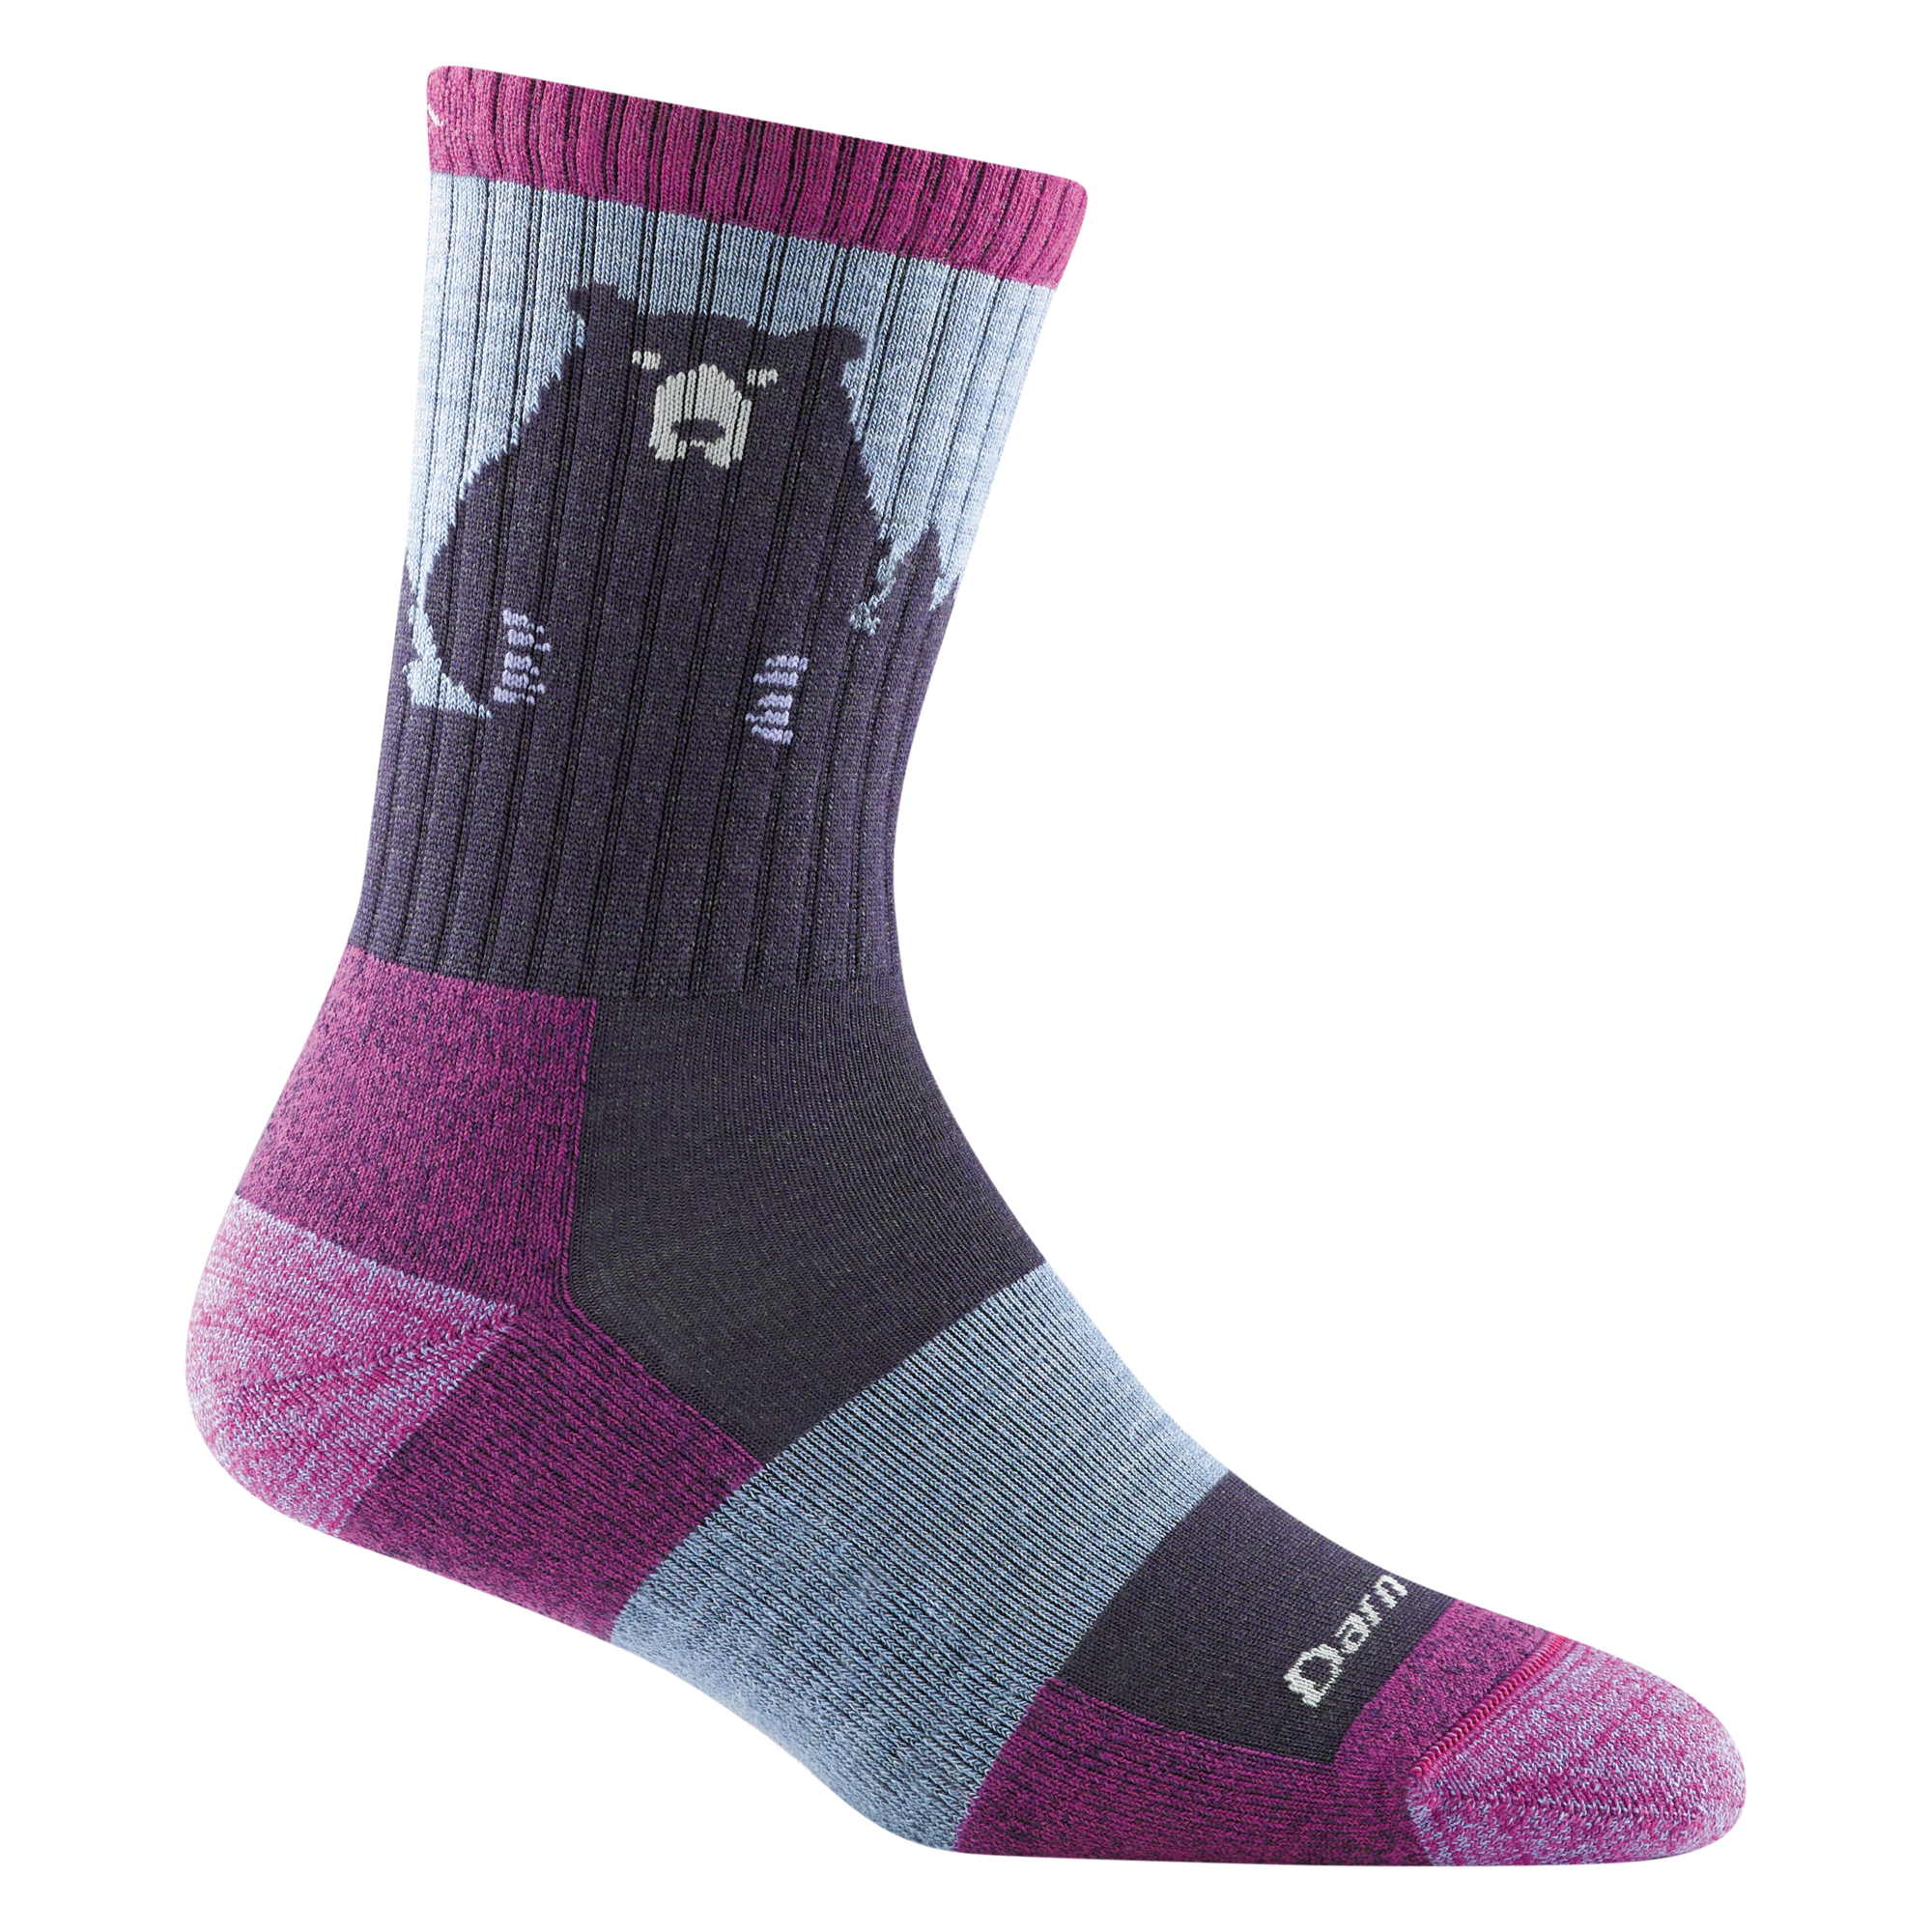 1970 women's bear town micro crew hiking sock in color purple with heathered toe/heel accents and purple bear design on calf